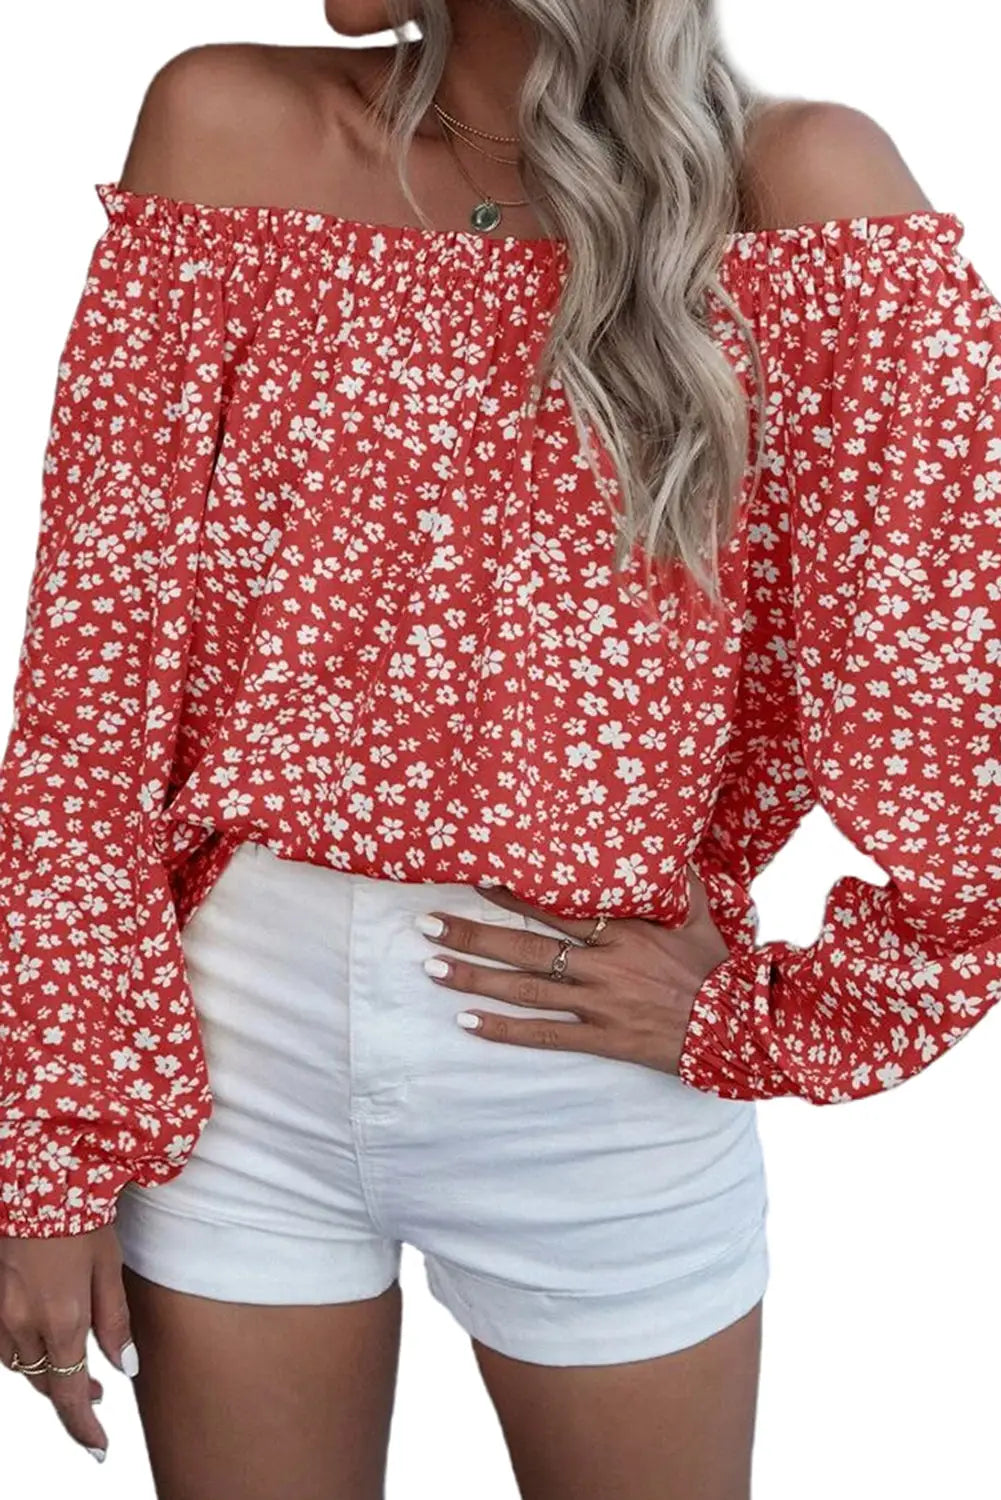 Fiery red floral print frill trim off-shoulder lantern sleeve blouse - blouses & shirts